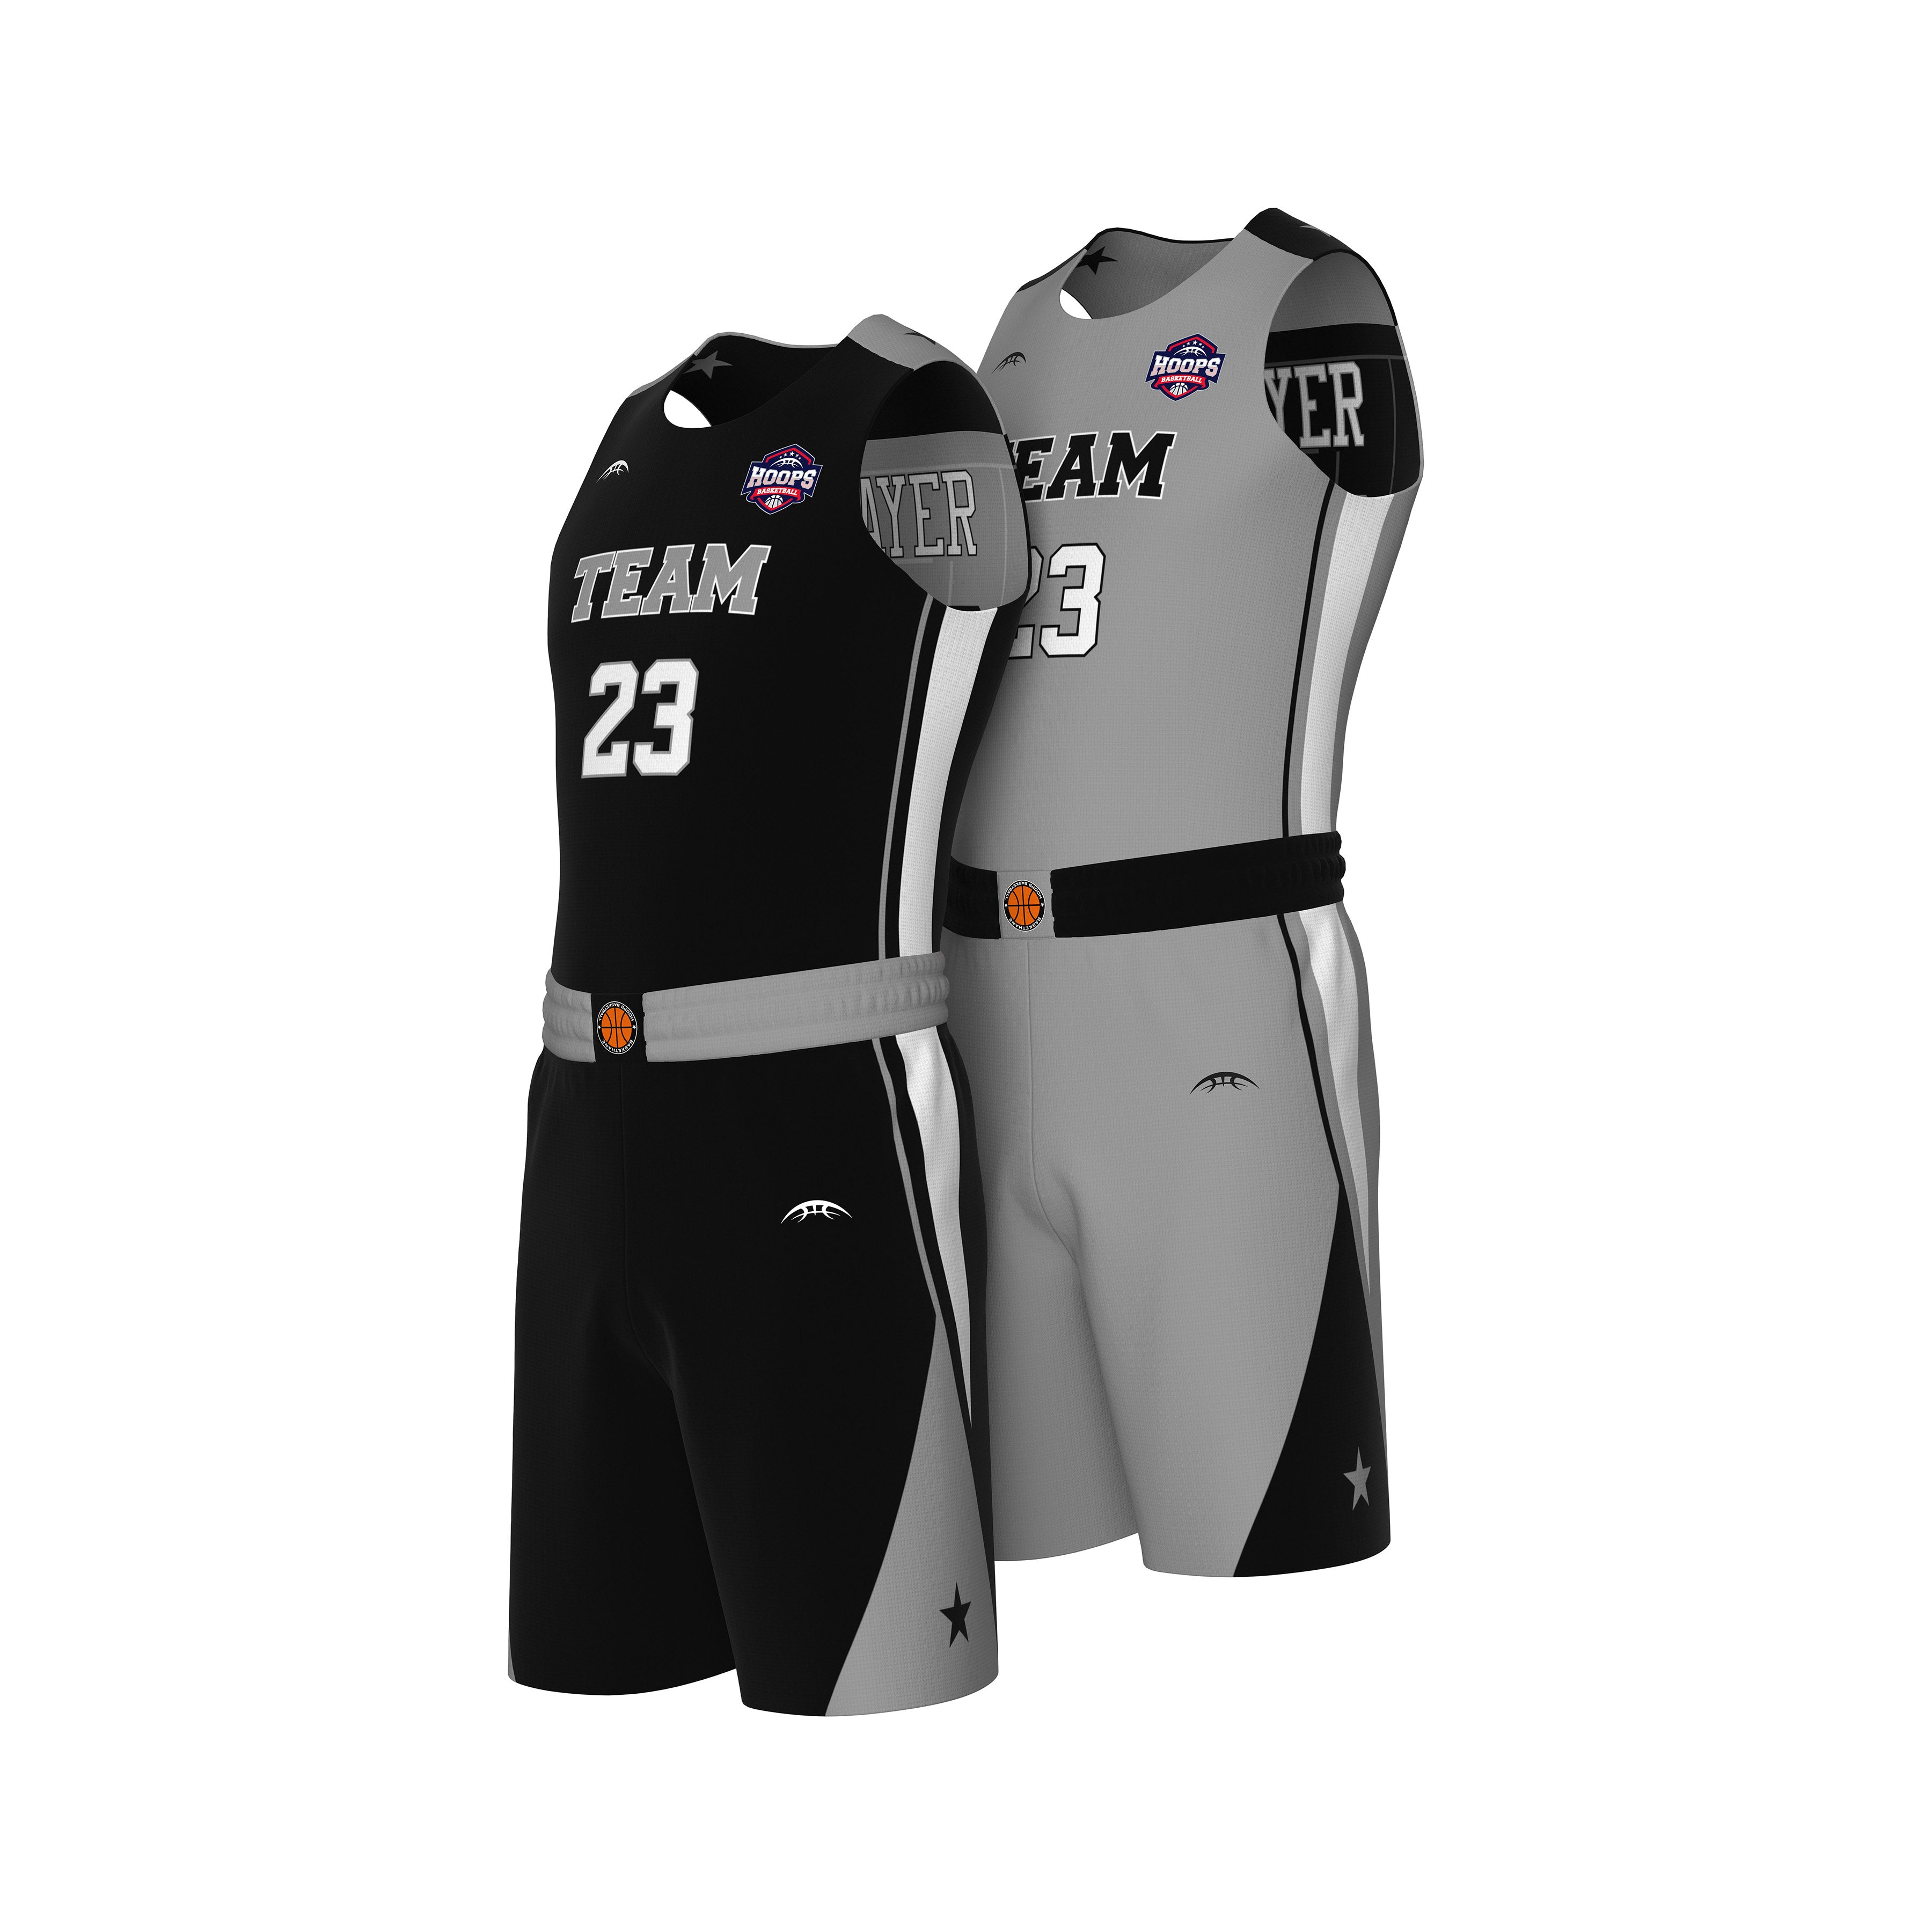 Design Your Own Basketball Wear Sublimated Black And White Game Basketball  Jersey Clothing